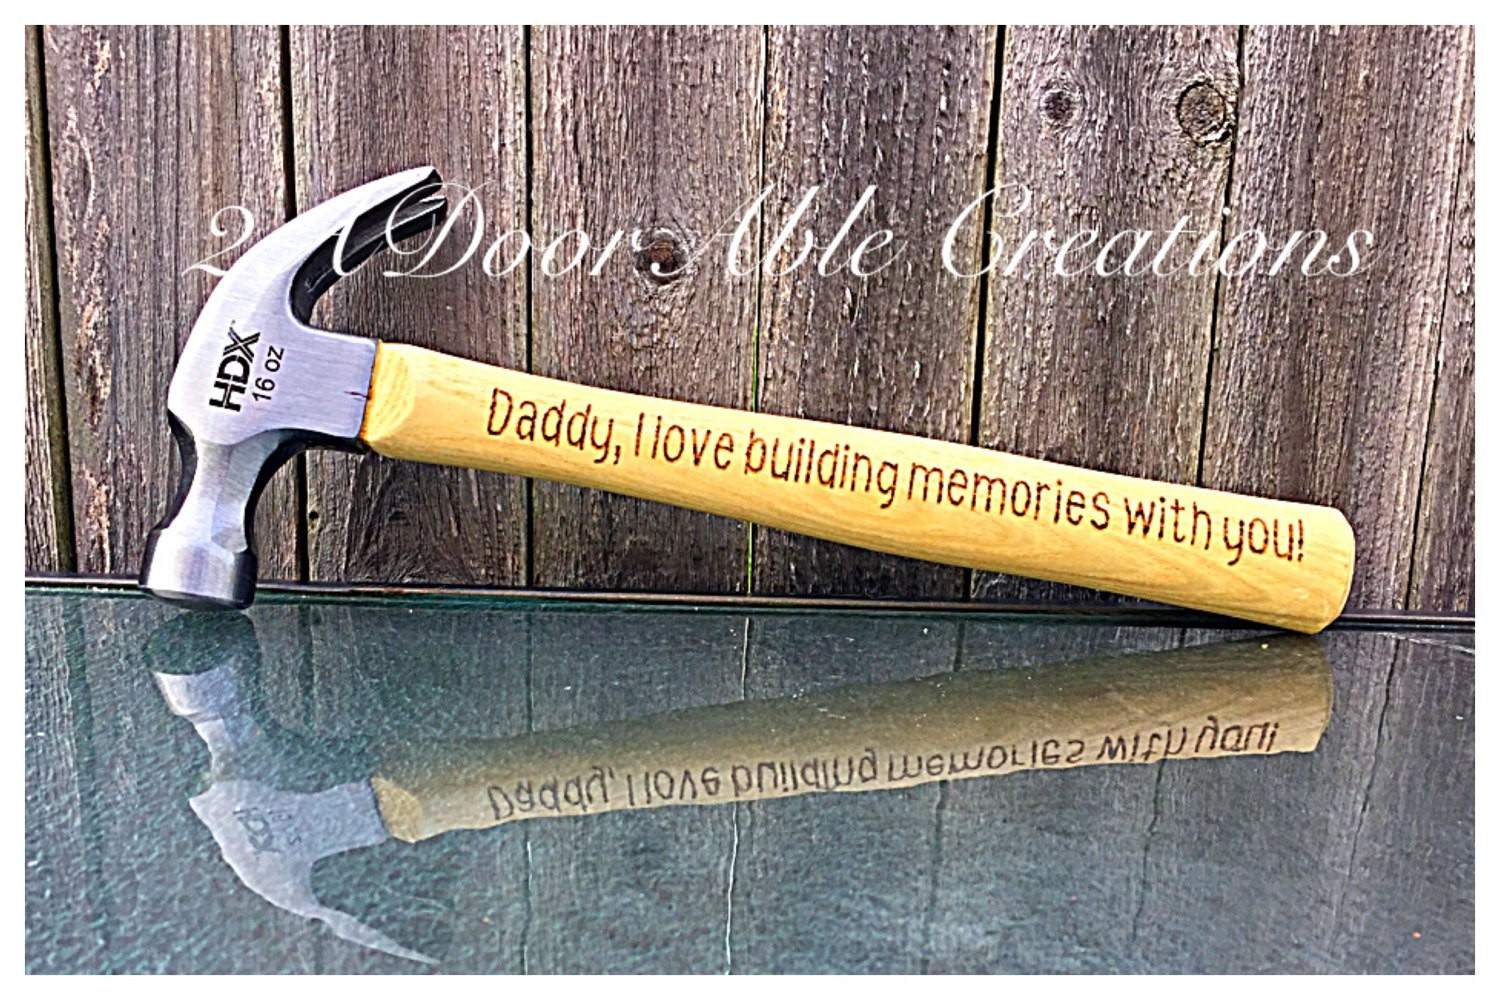 Fathers Day Hammer Quotes
 Personalized Hammer Father s Day Gift 16 oz hammer